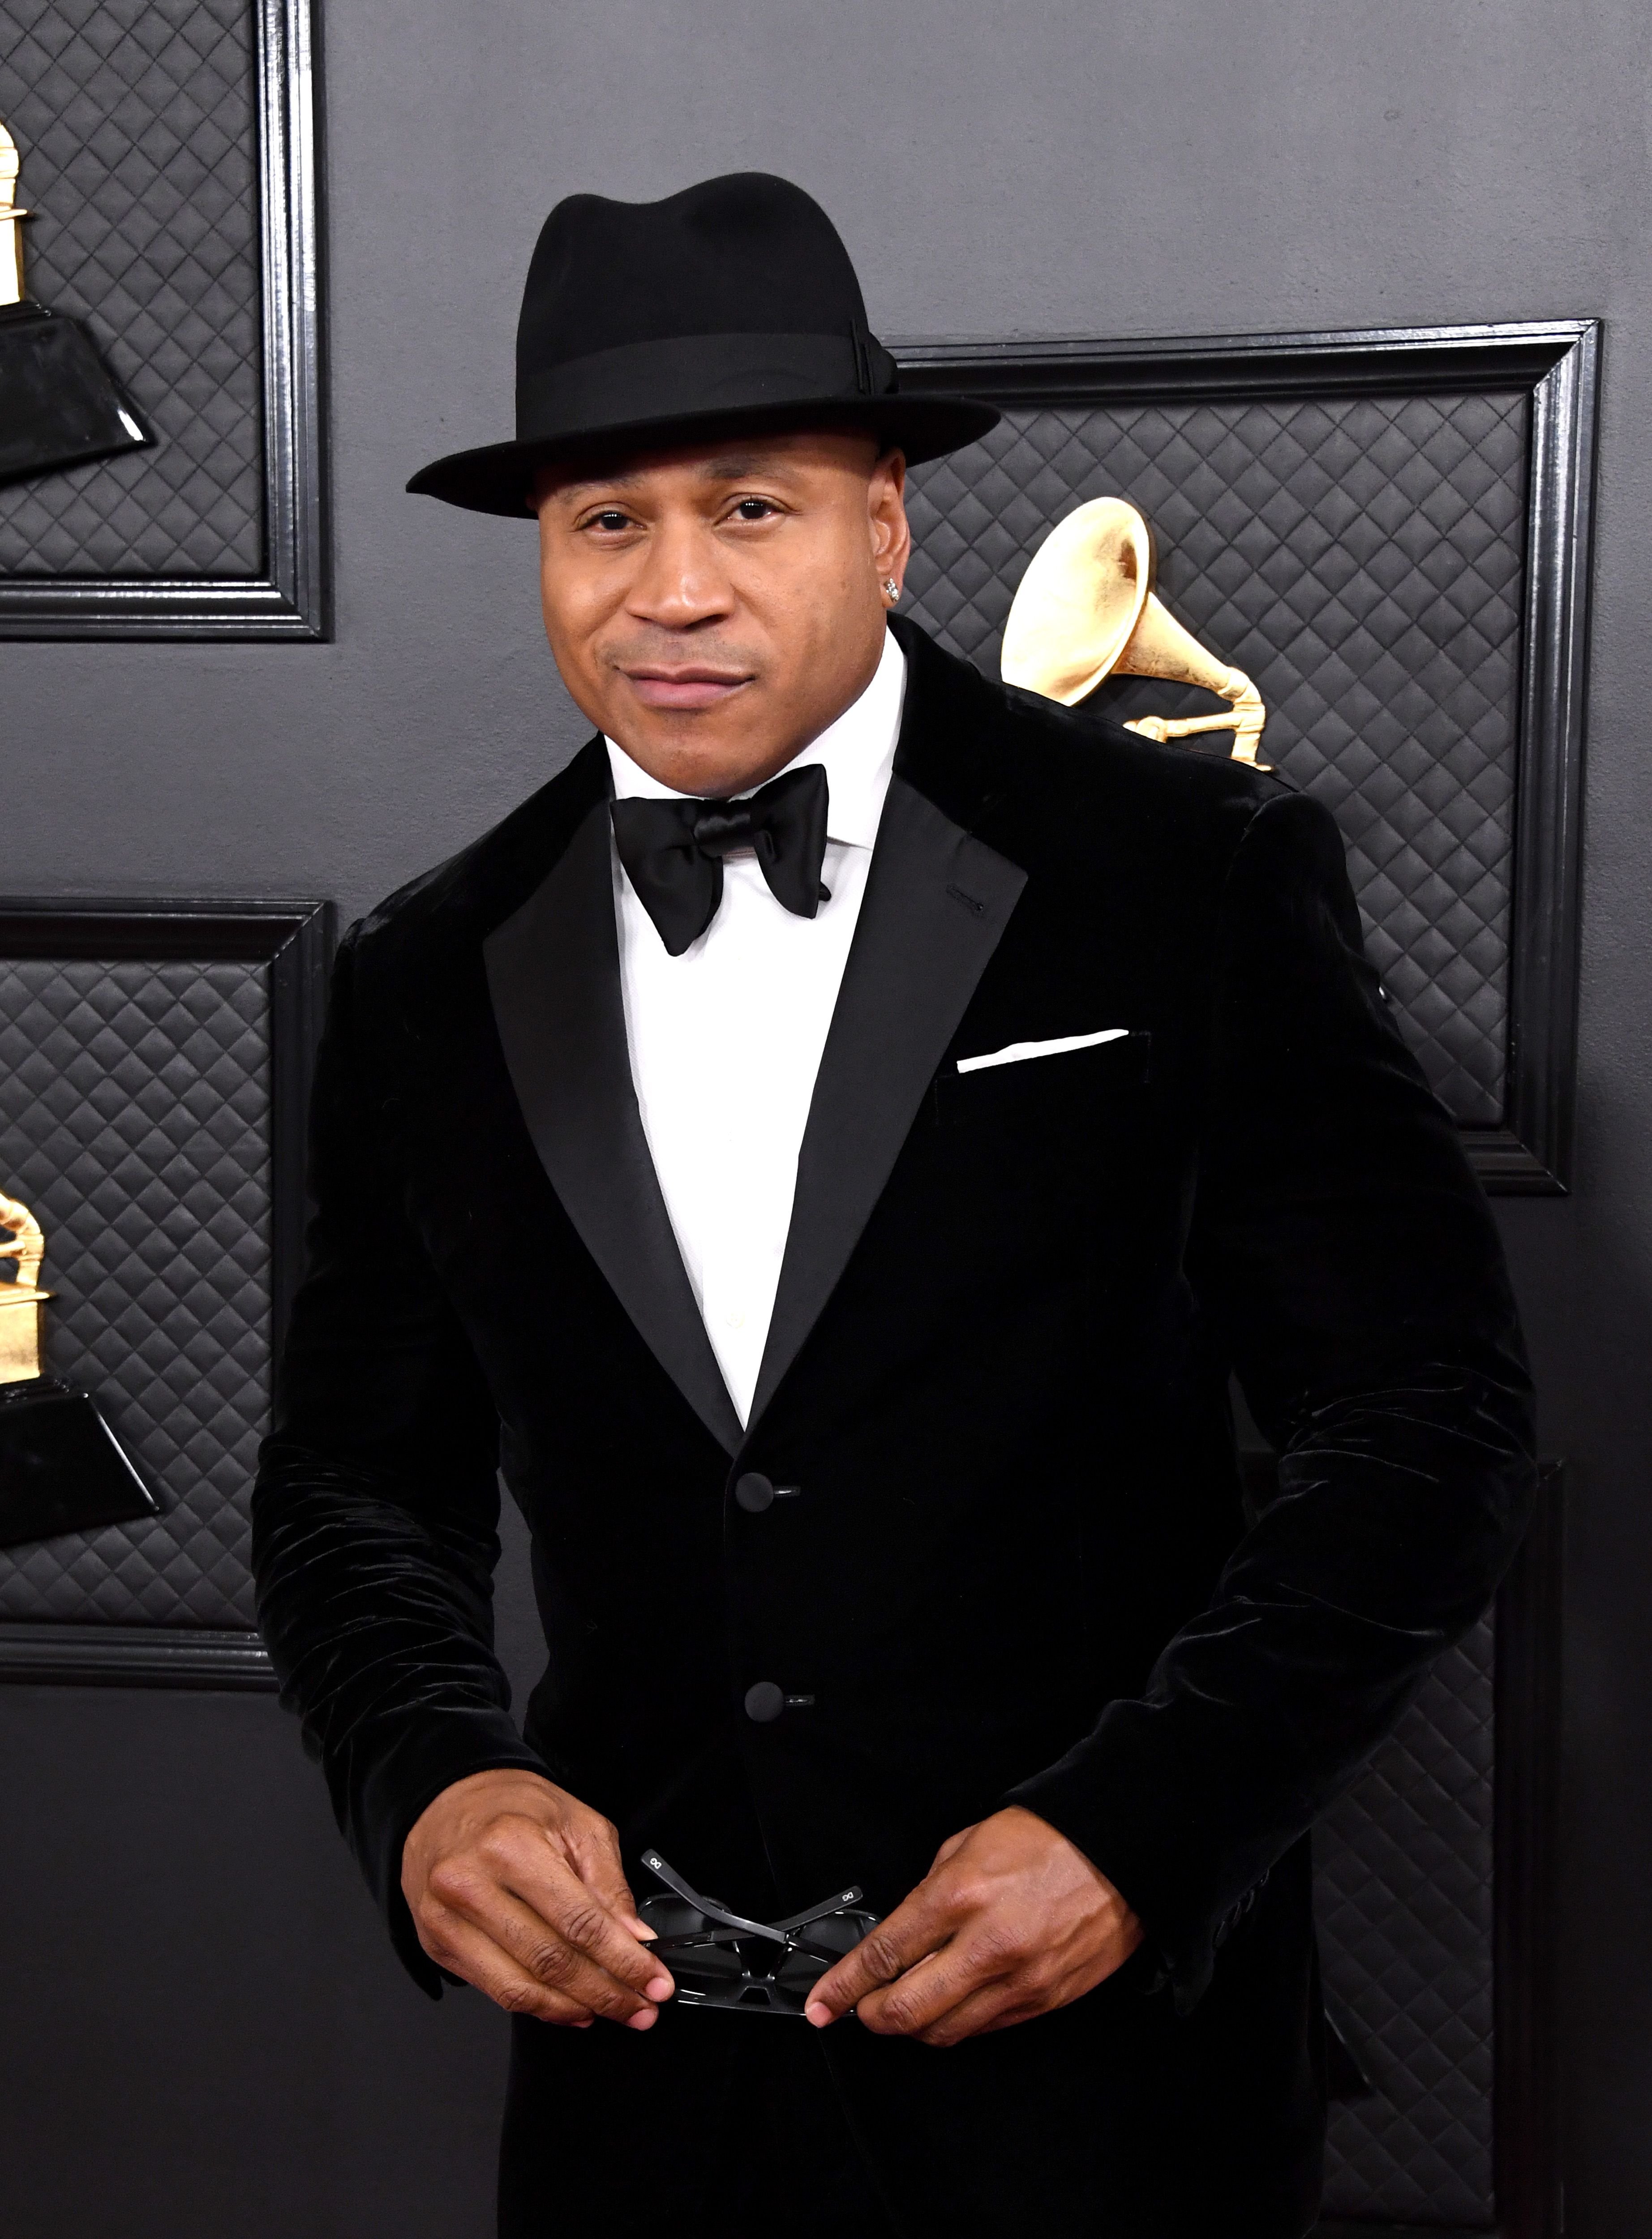 LL Cool J at the 62nd Annual Grammy Awards at Staples Center on January 26, 2020 | Photo: Getty Images